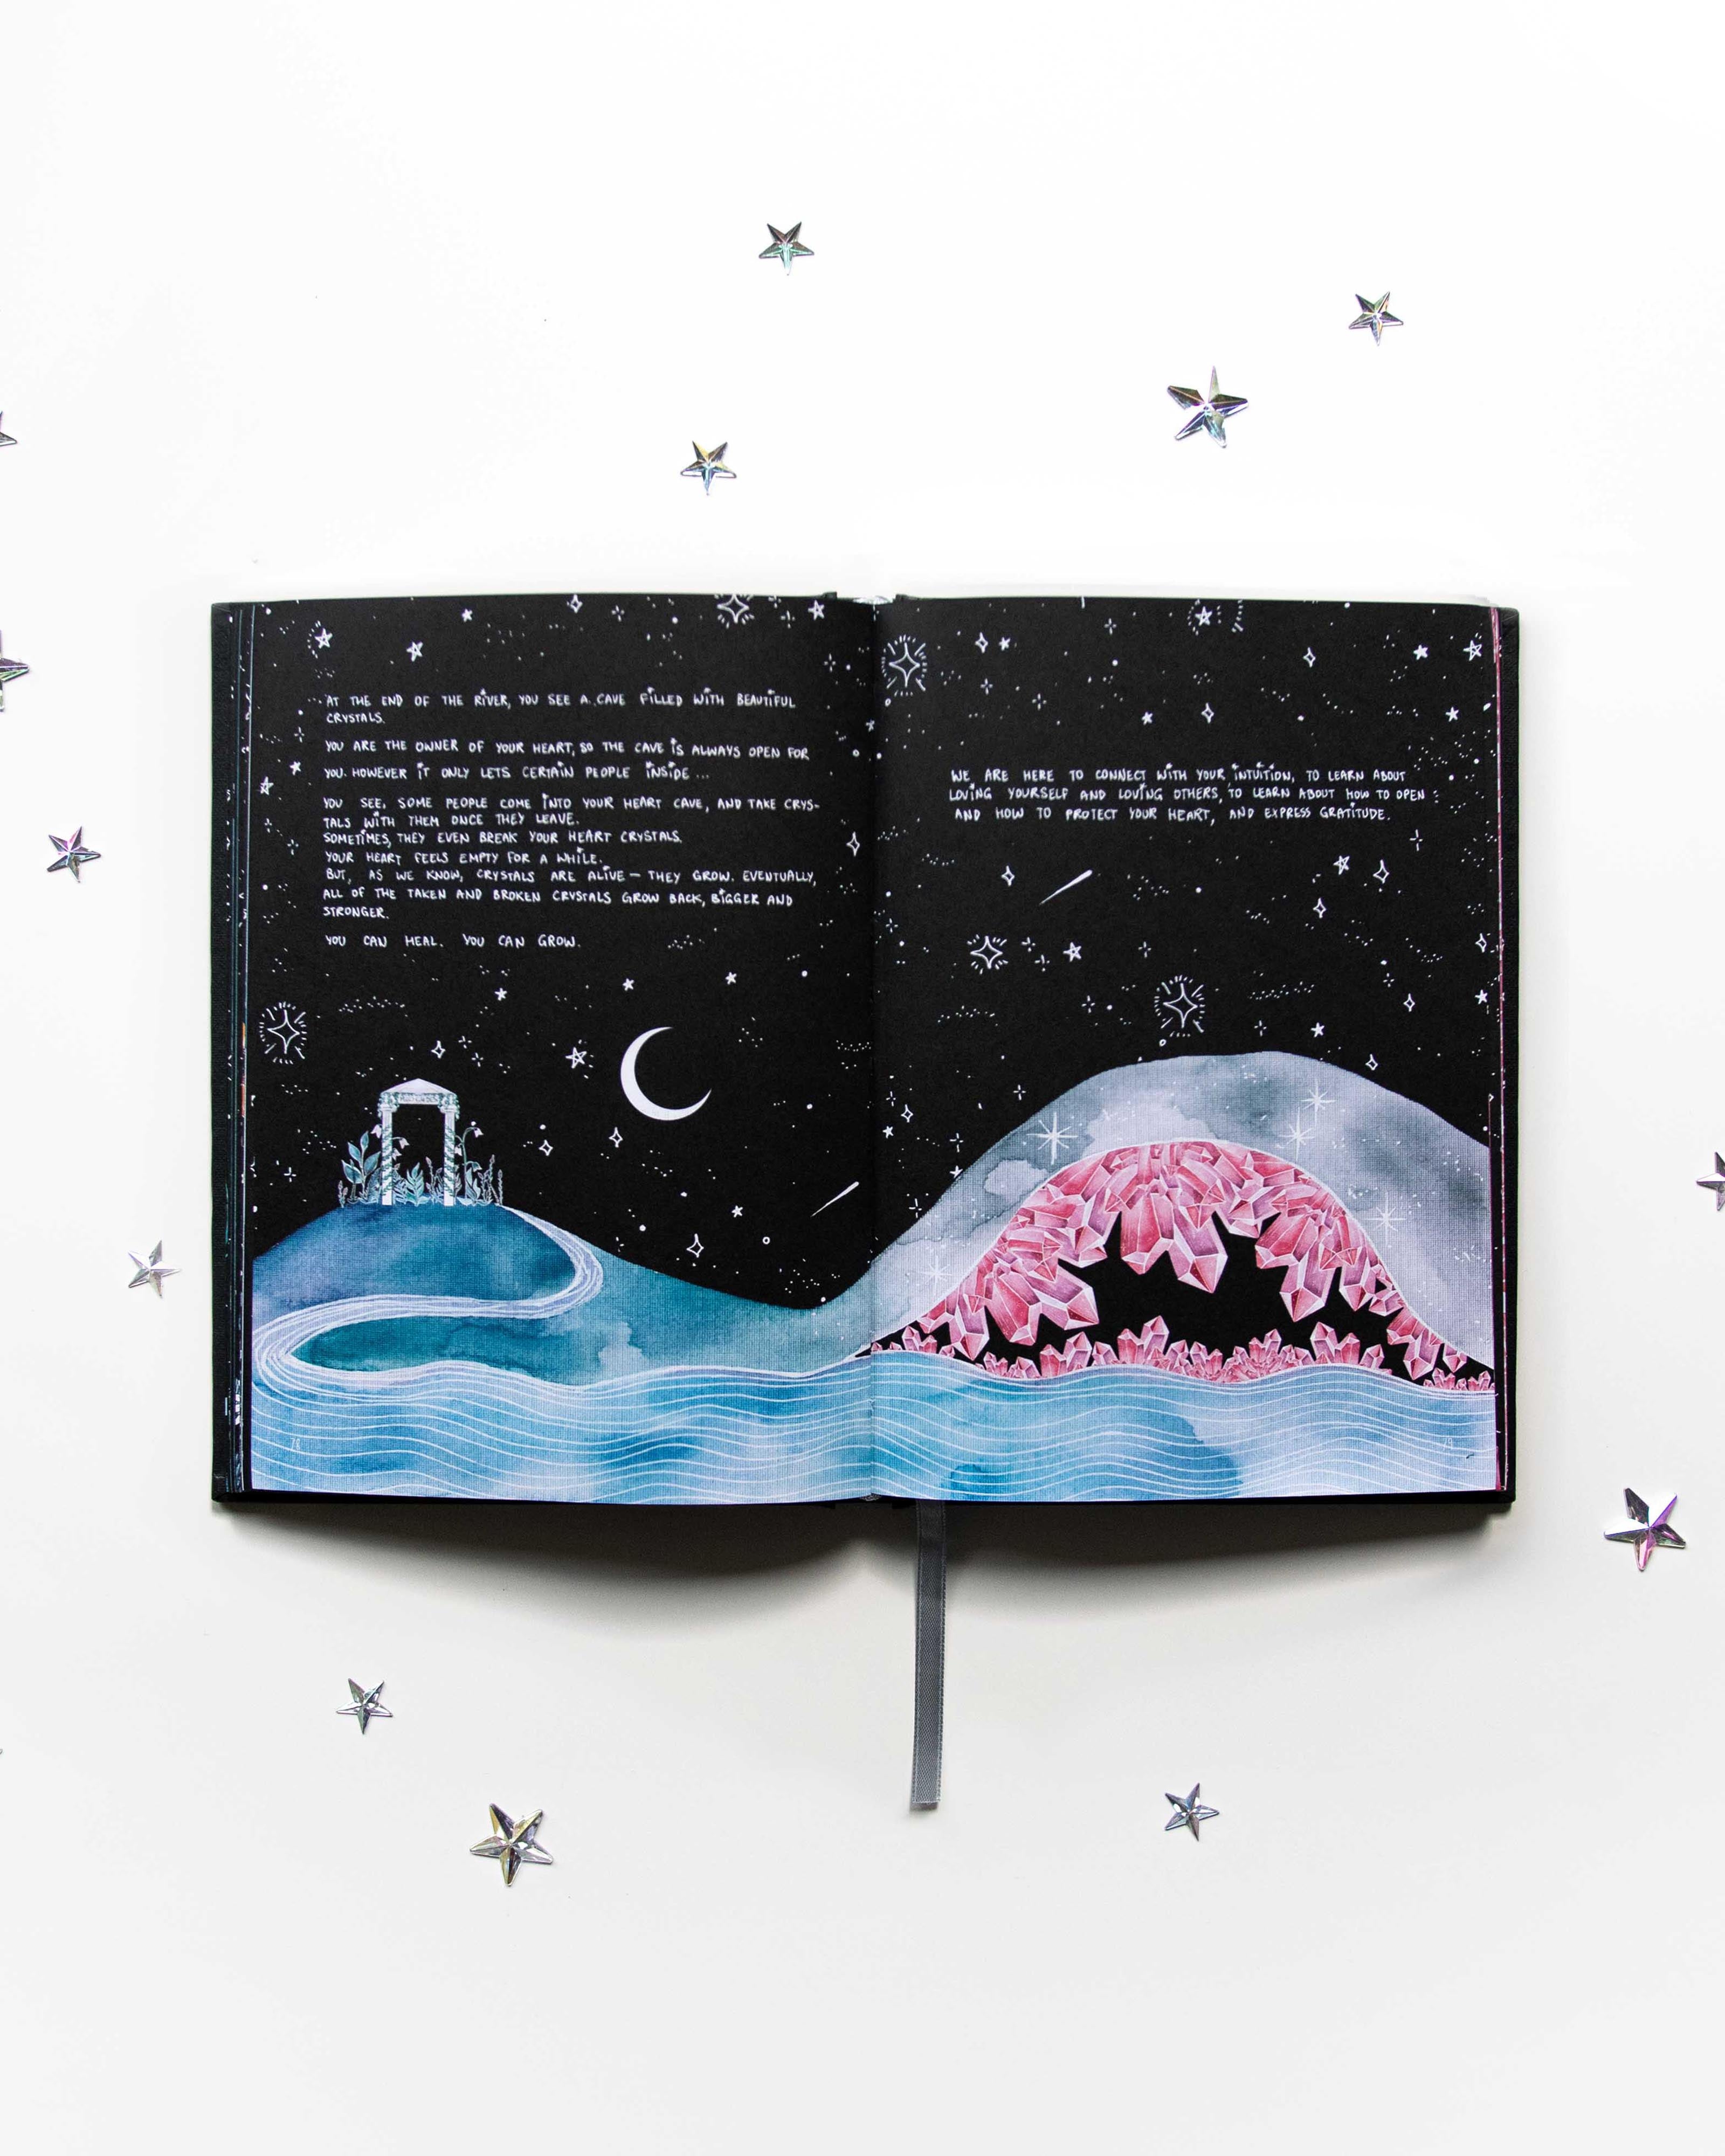 Dreamy Moons A JOURNEY WITHIN BOOK